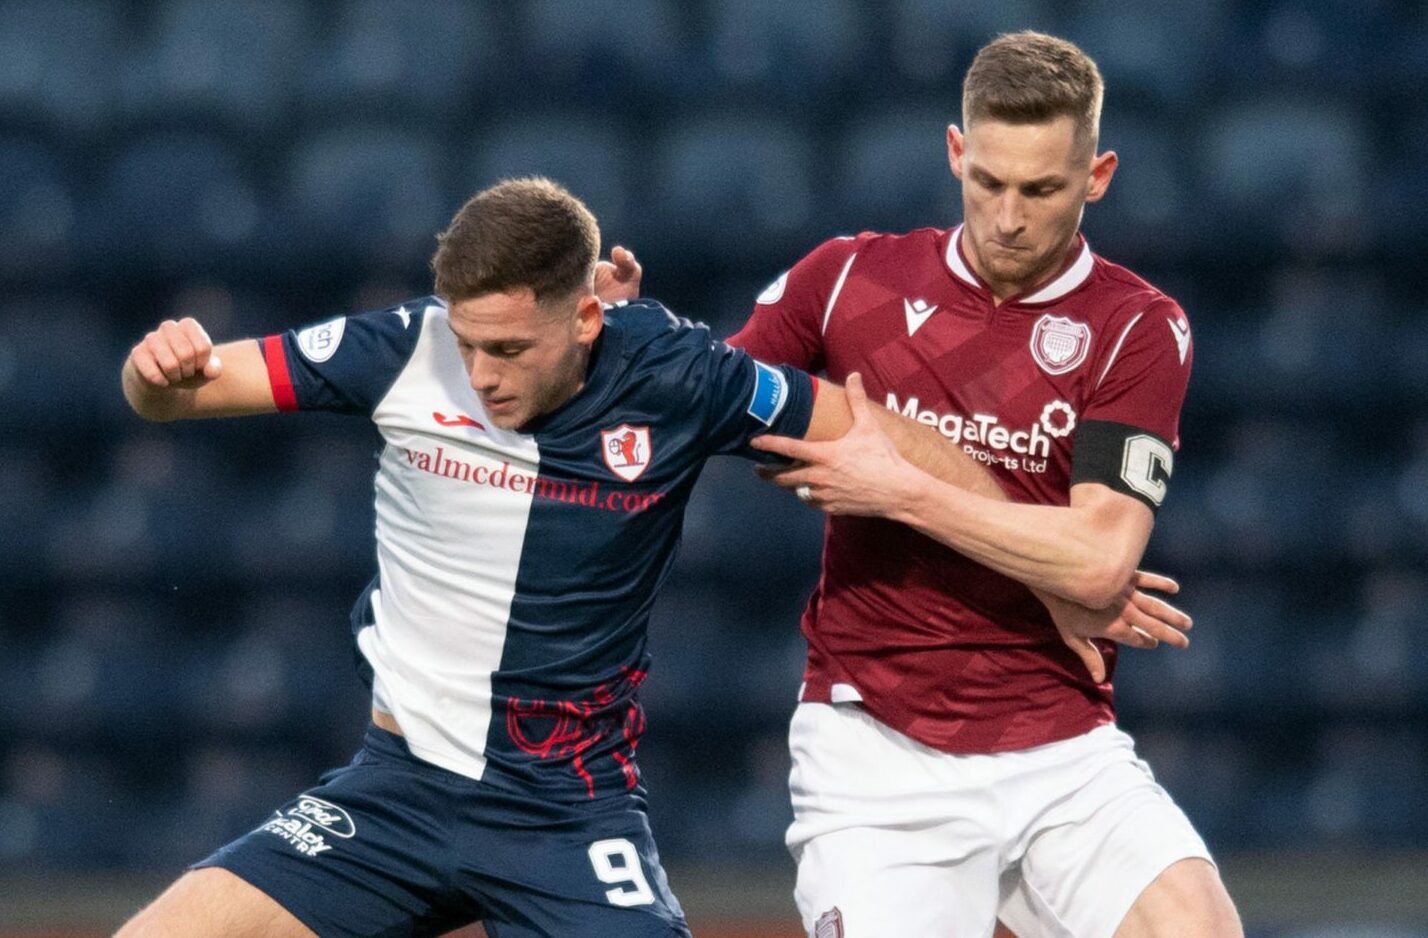 Arbroath skipper returns to the side following his suspension.